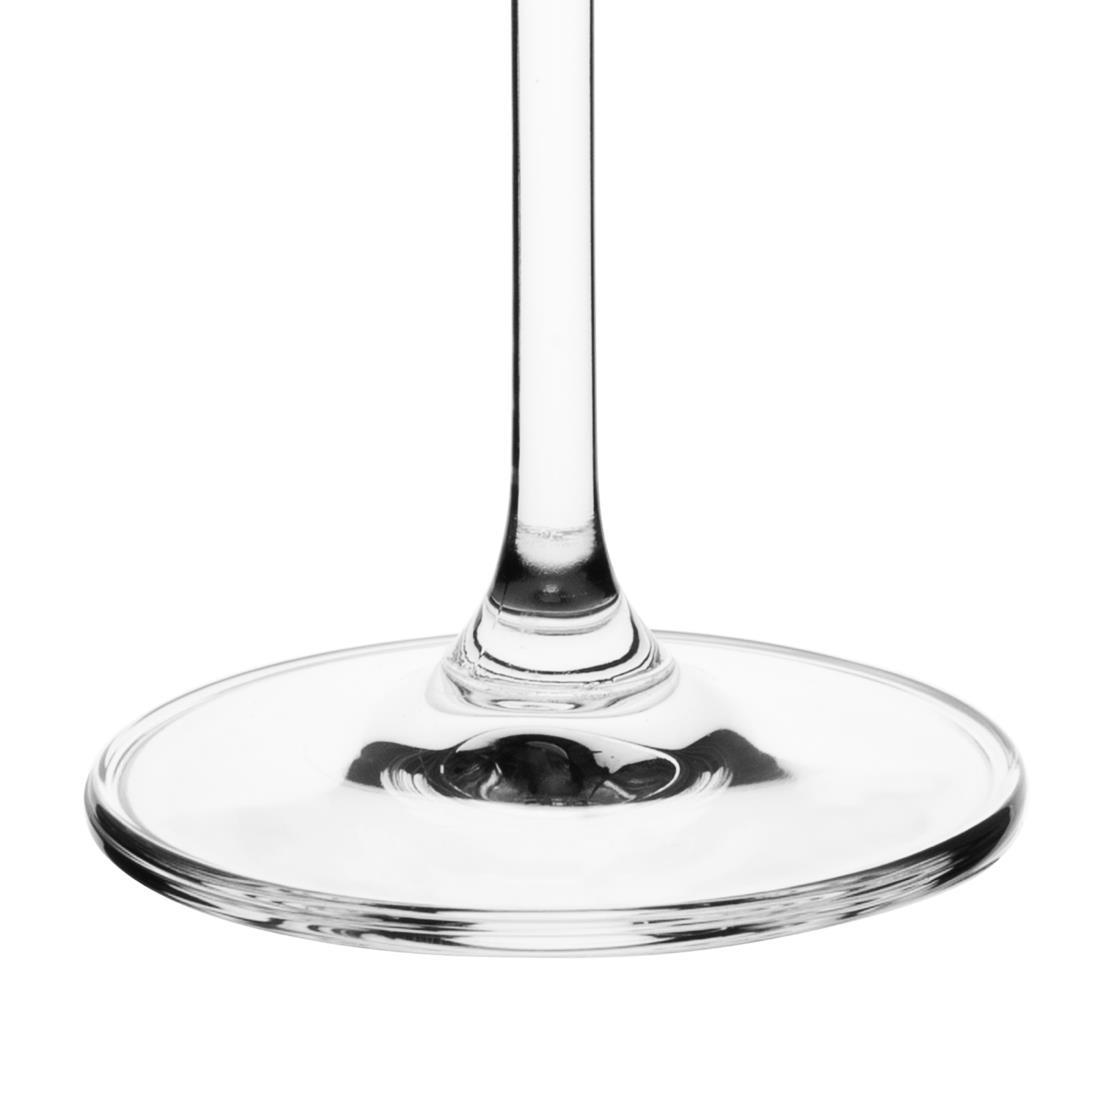 Olympia Chime Crystal Wine Glasses 495ml (Pack of 6) - GF734  - 4